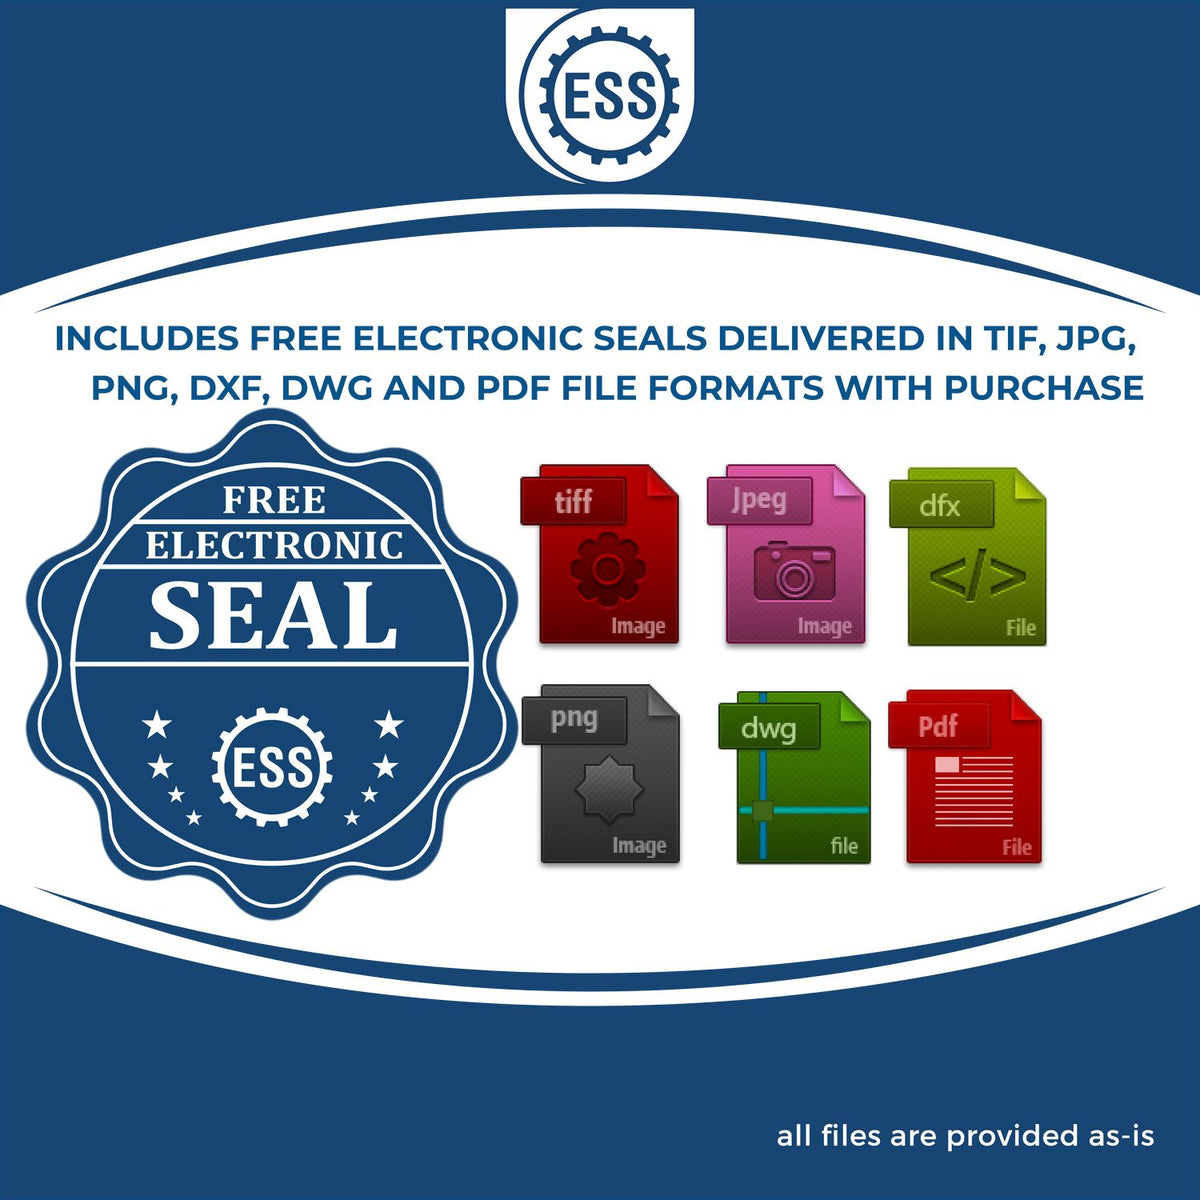 An infographic for the free electronic seal for the MaxLight Premium Pre-Inked Ohio State Seal Notarial Stamp illustrating the different file type icons such as DXF, DWG, TIF, JPG and PNG.